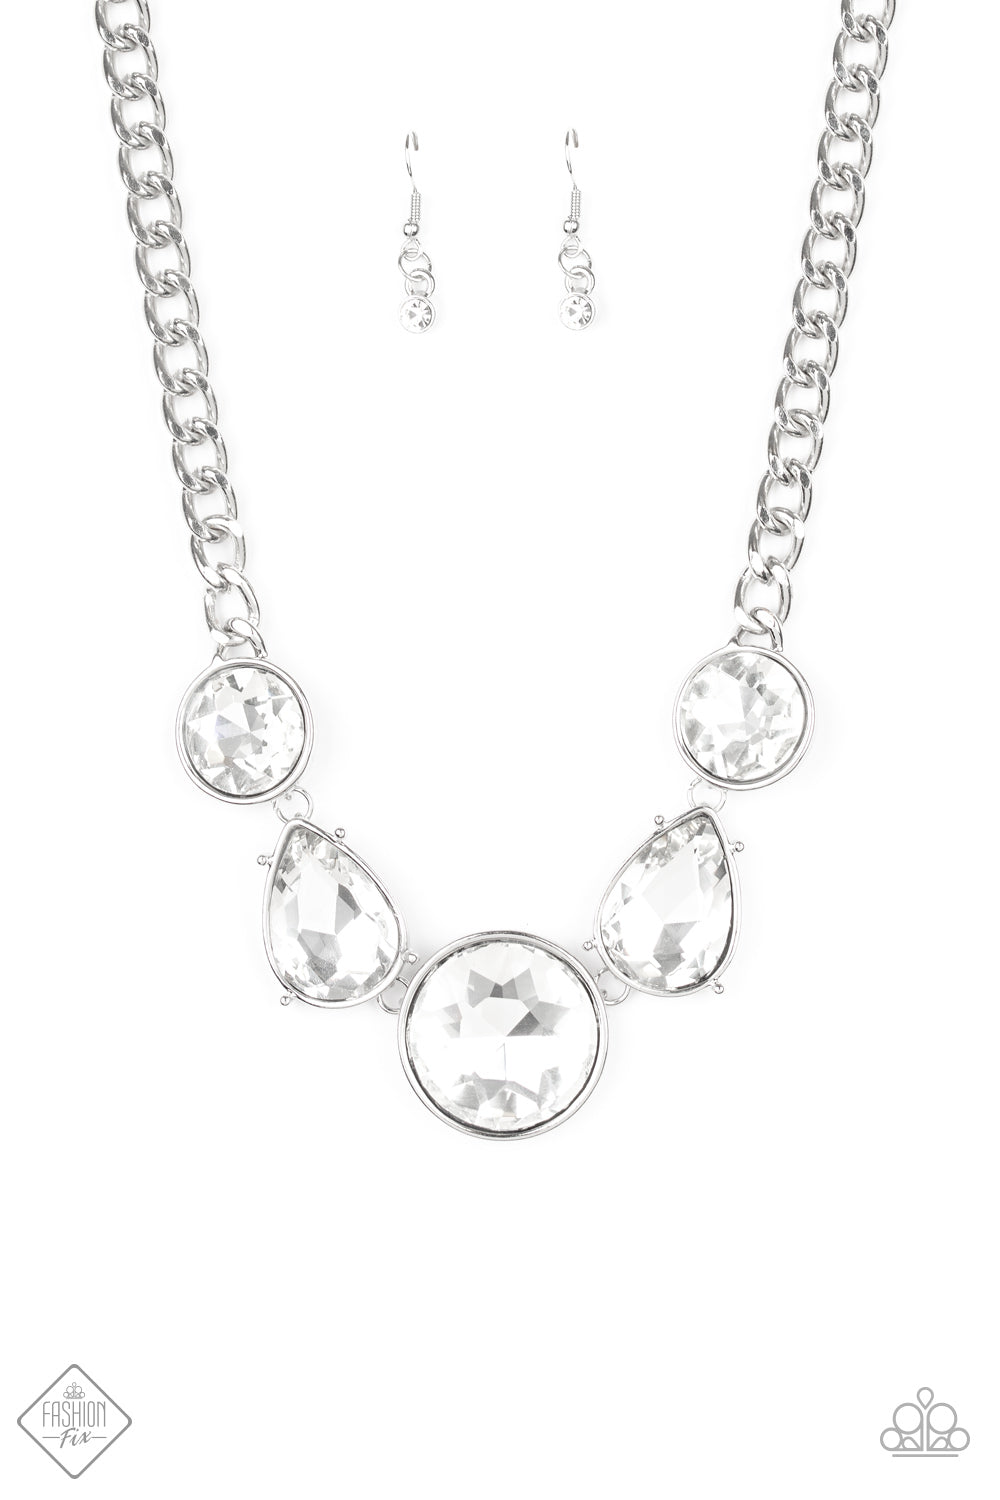 All The Worlds My Stage White Rhinestone Necklace - Paparazzi Accessories